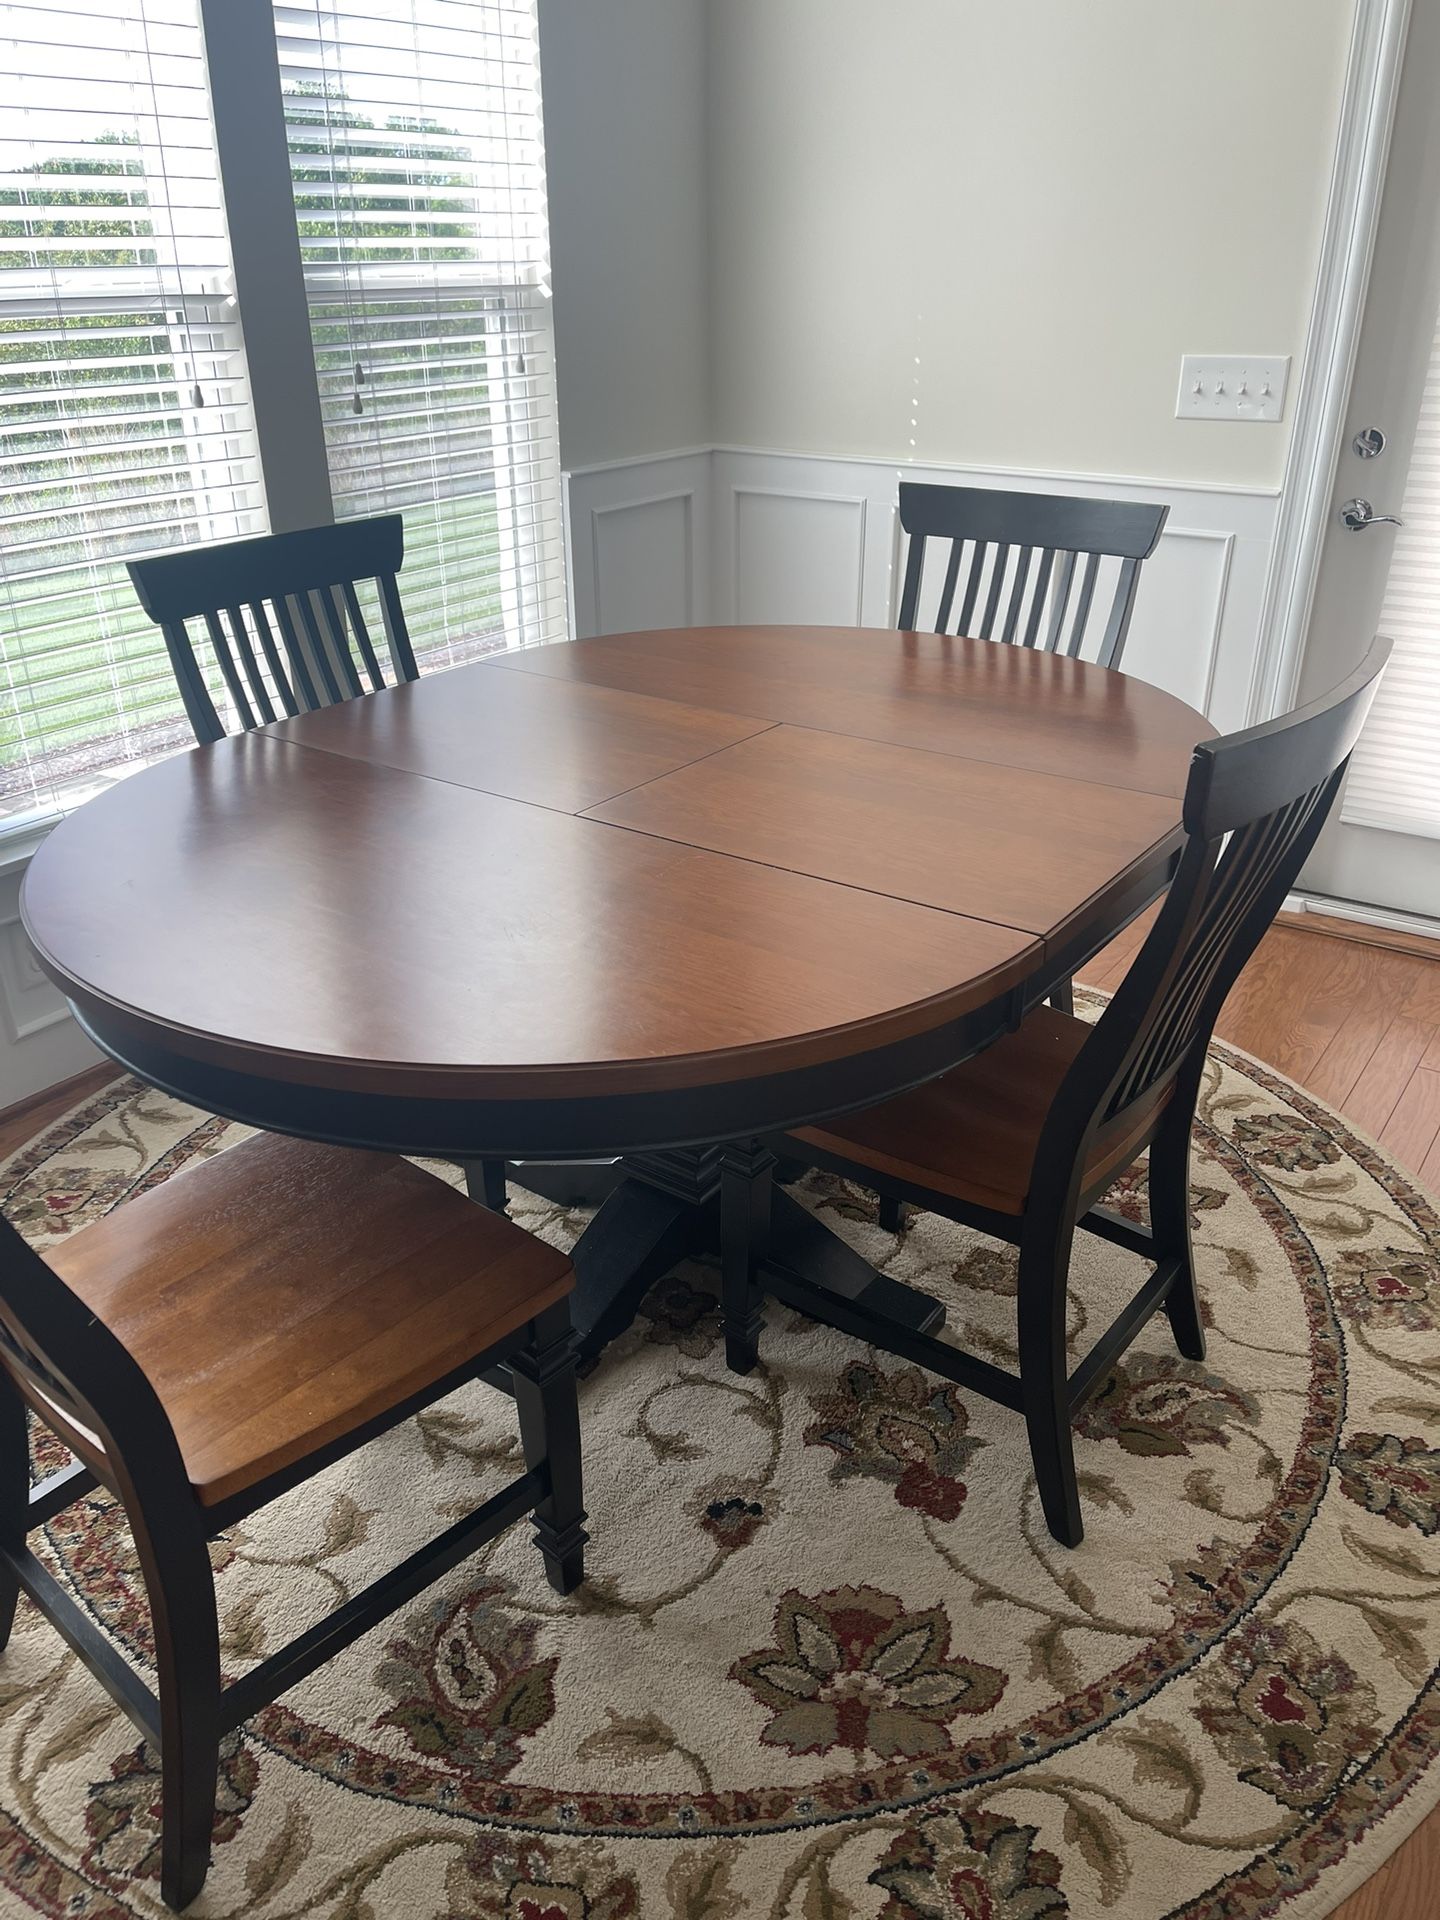 Wood Kitchen Table & 4 Chairs